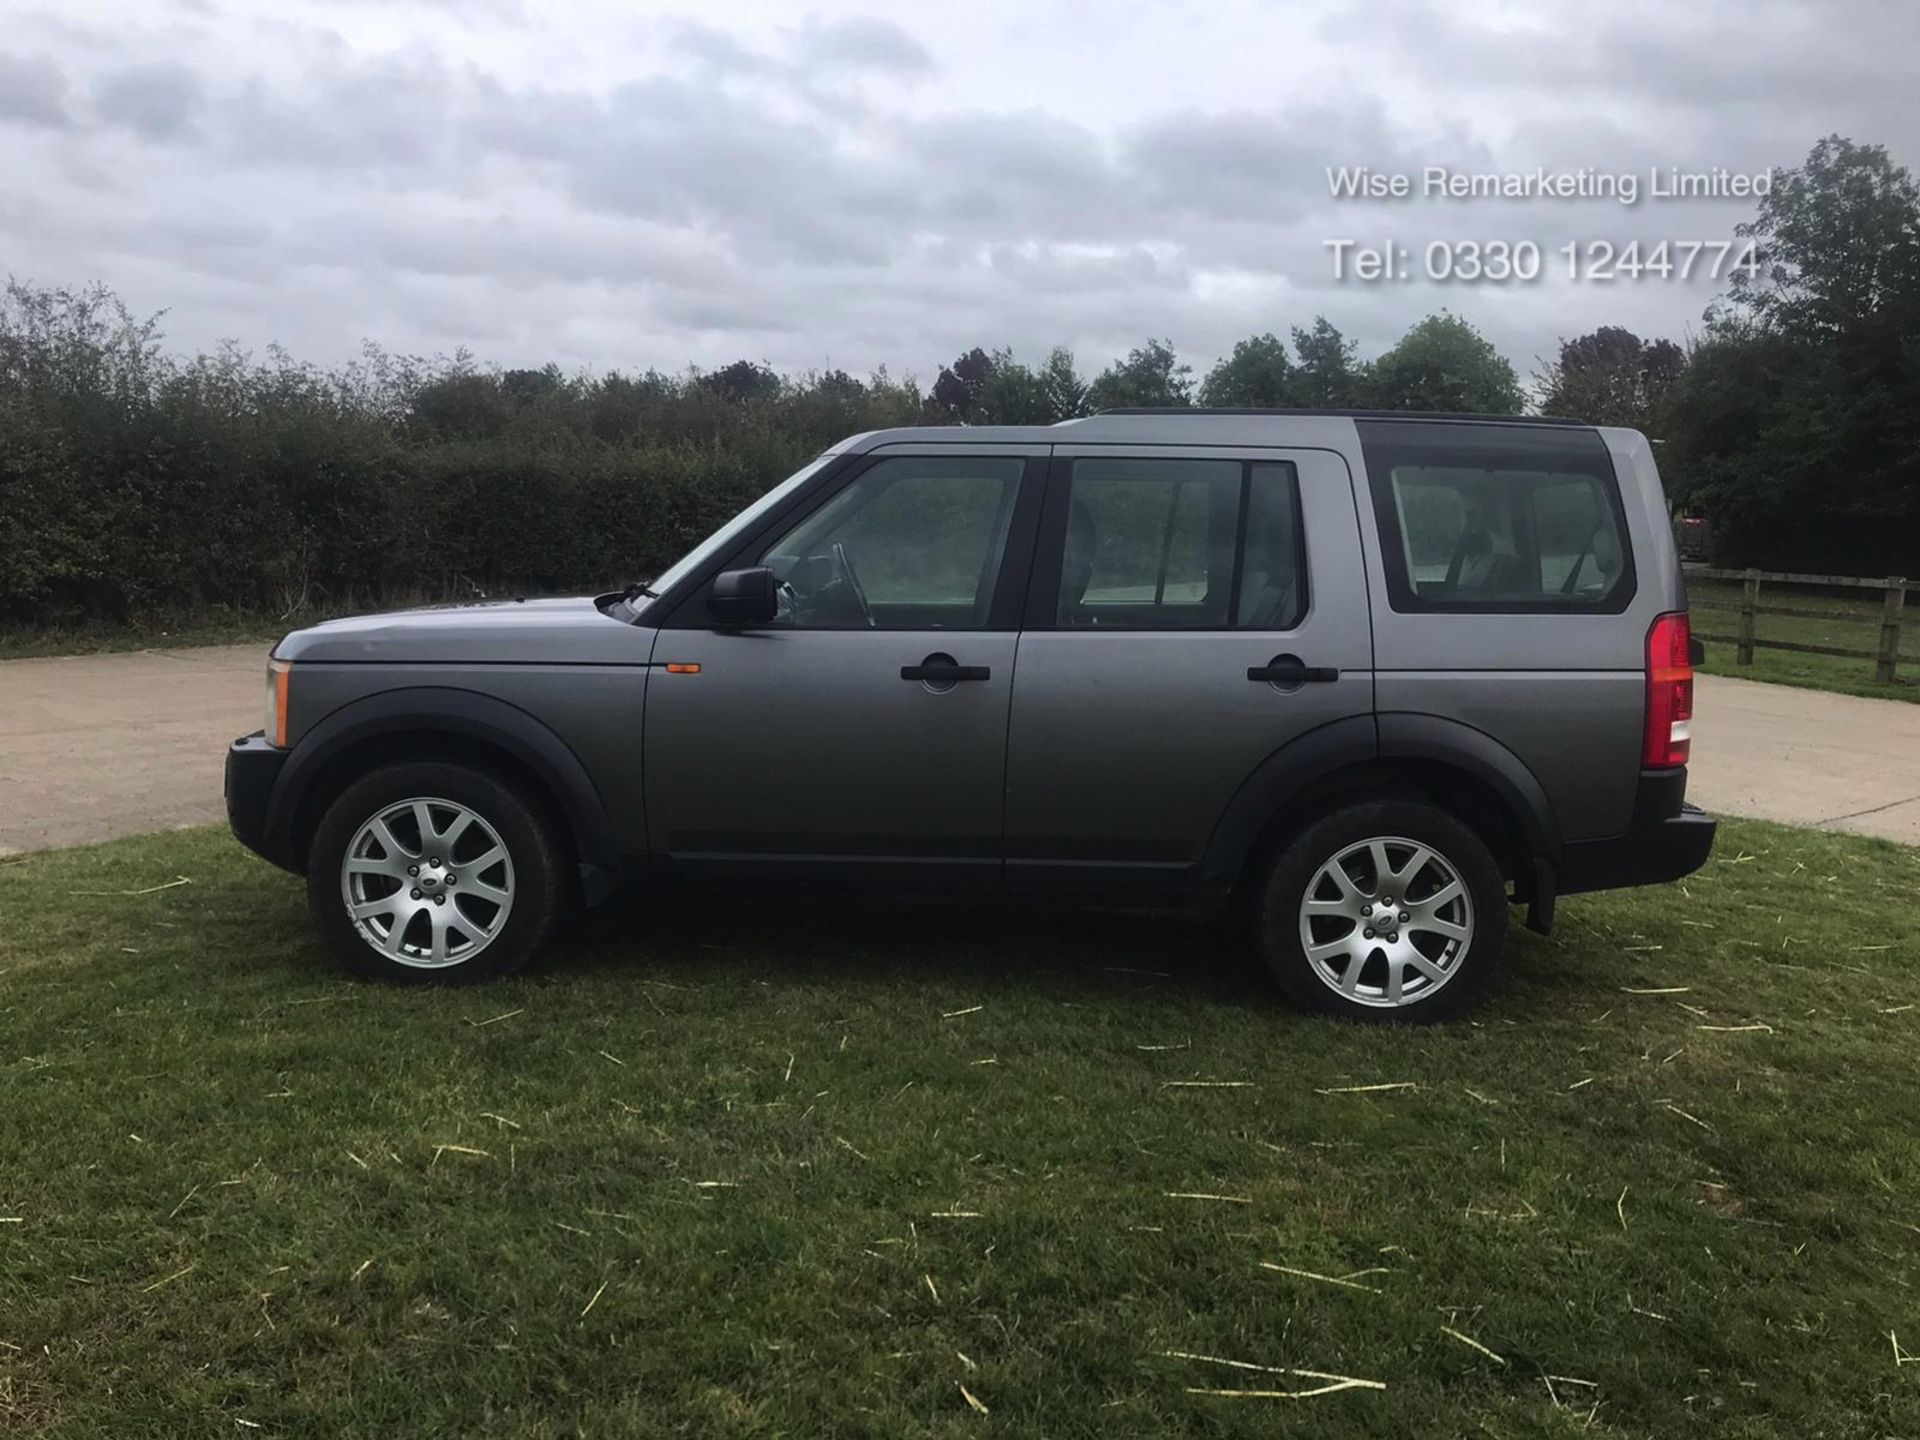 Land Rover Discovery 2.7 TD V6 Special Equipment - Auto - 2008 08 Reg - Service History - 4x4 - Image 4 of 19